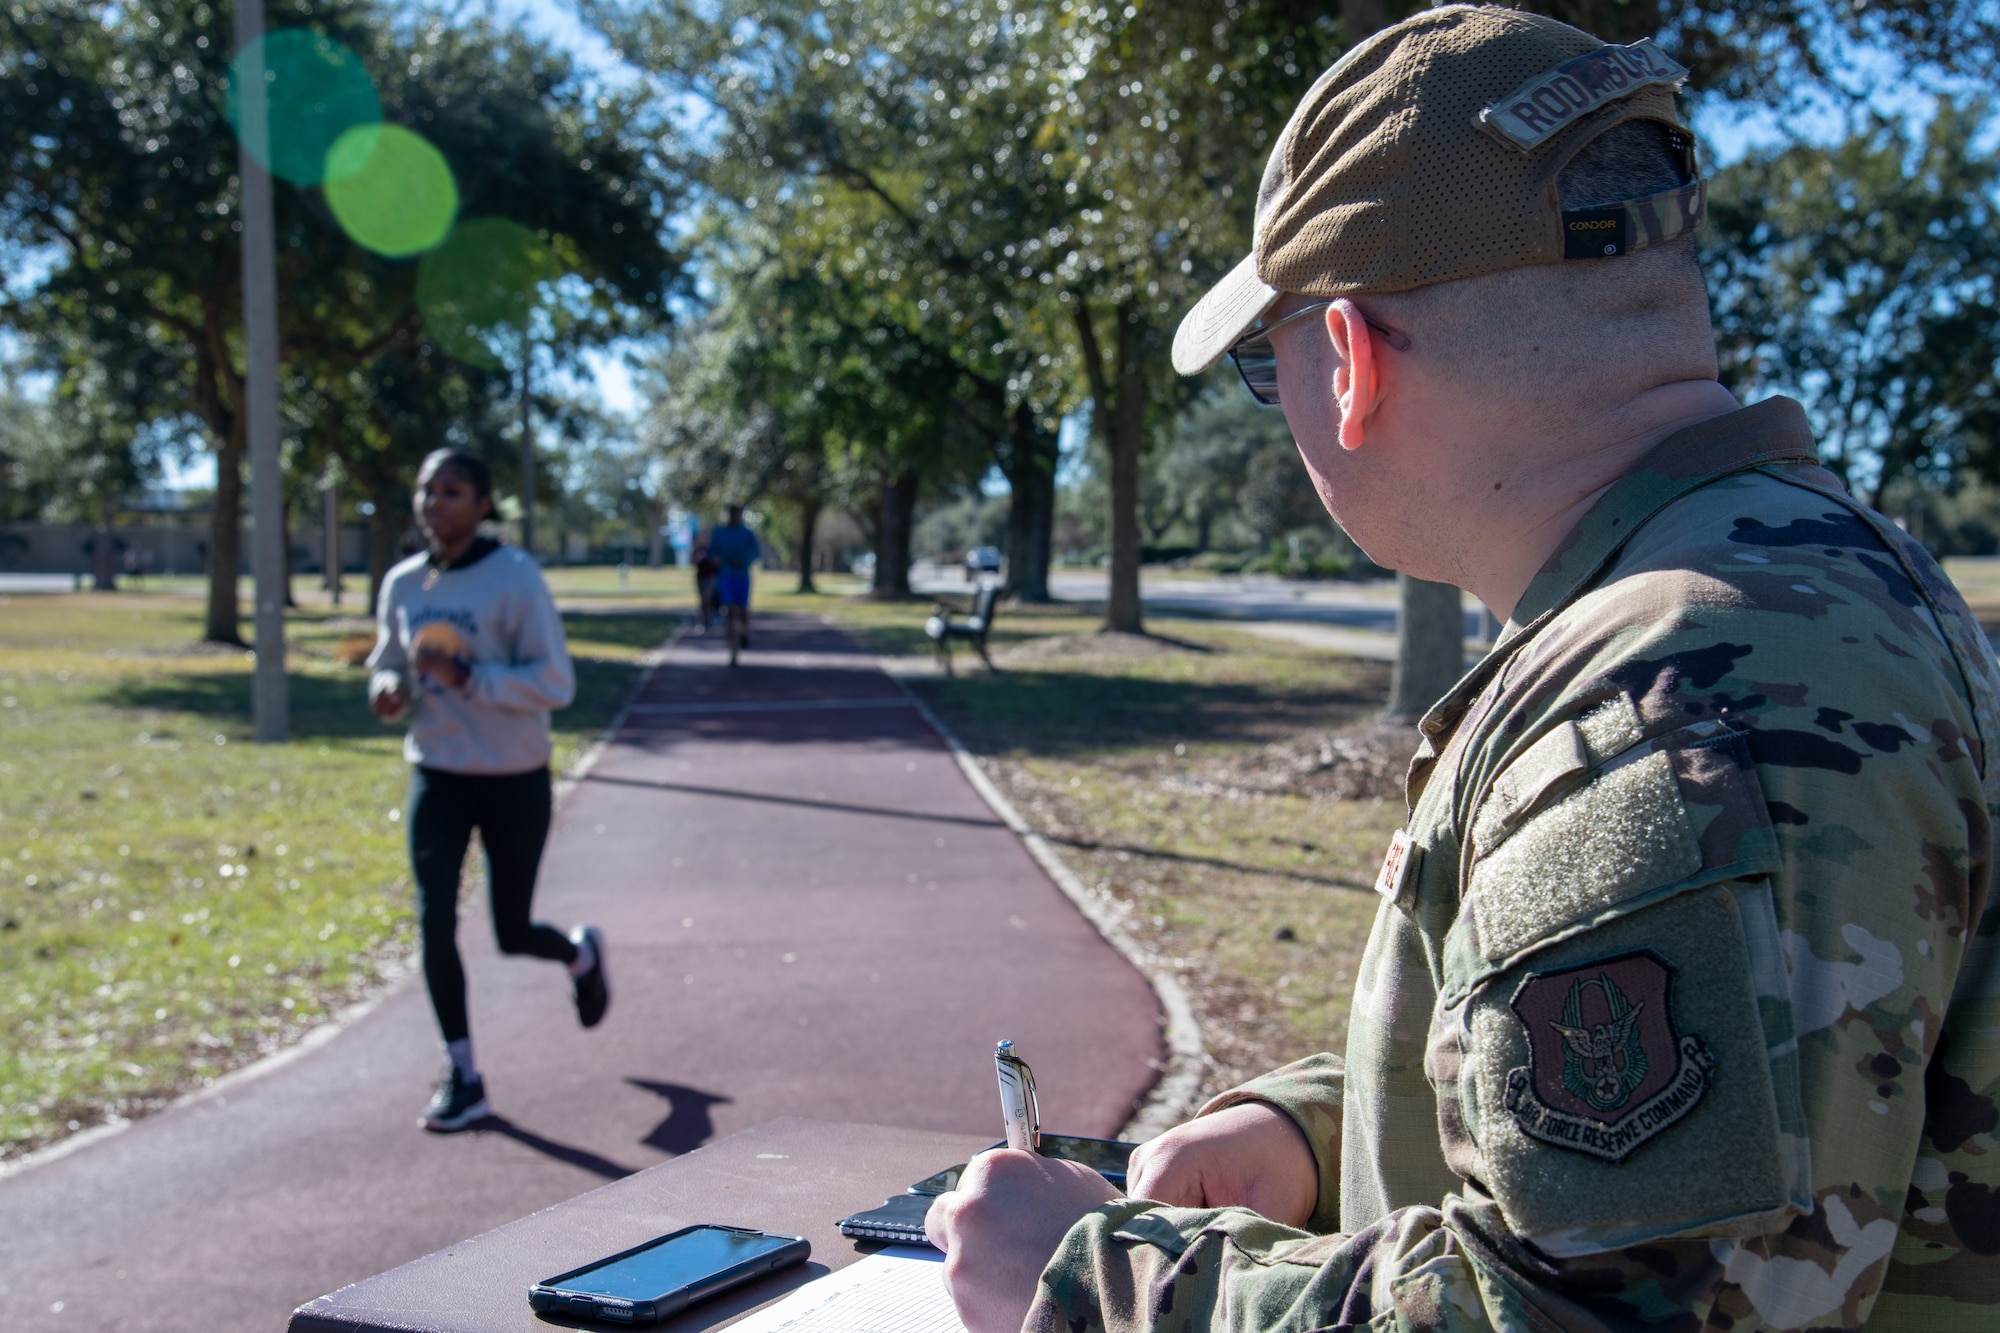 A person runs on a track in the background as MSgt Rodriguez marks a sheet of paper while looking at the runner